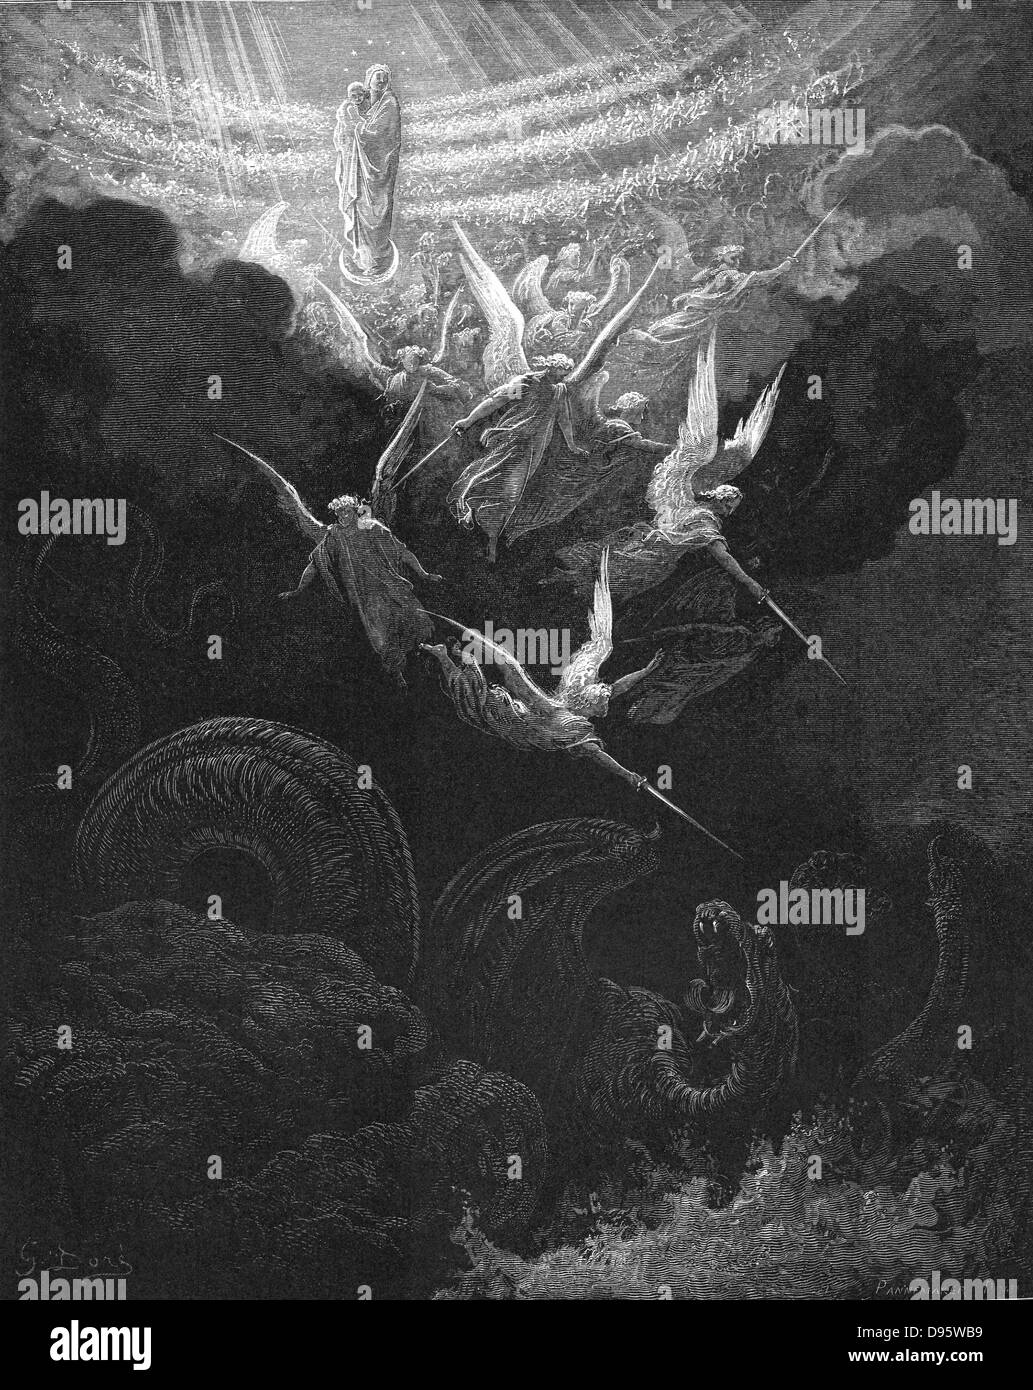 Archangel Michael and his angels fighting the dragon. Virgin Mary with infant Jesus in arms looks down from Heaven.  Revelation 12:1. From Gustave Dore 'Bible' 1865-1866. Wood engraving. Stock Photo